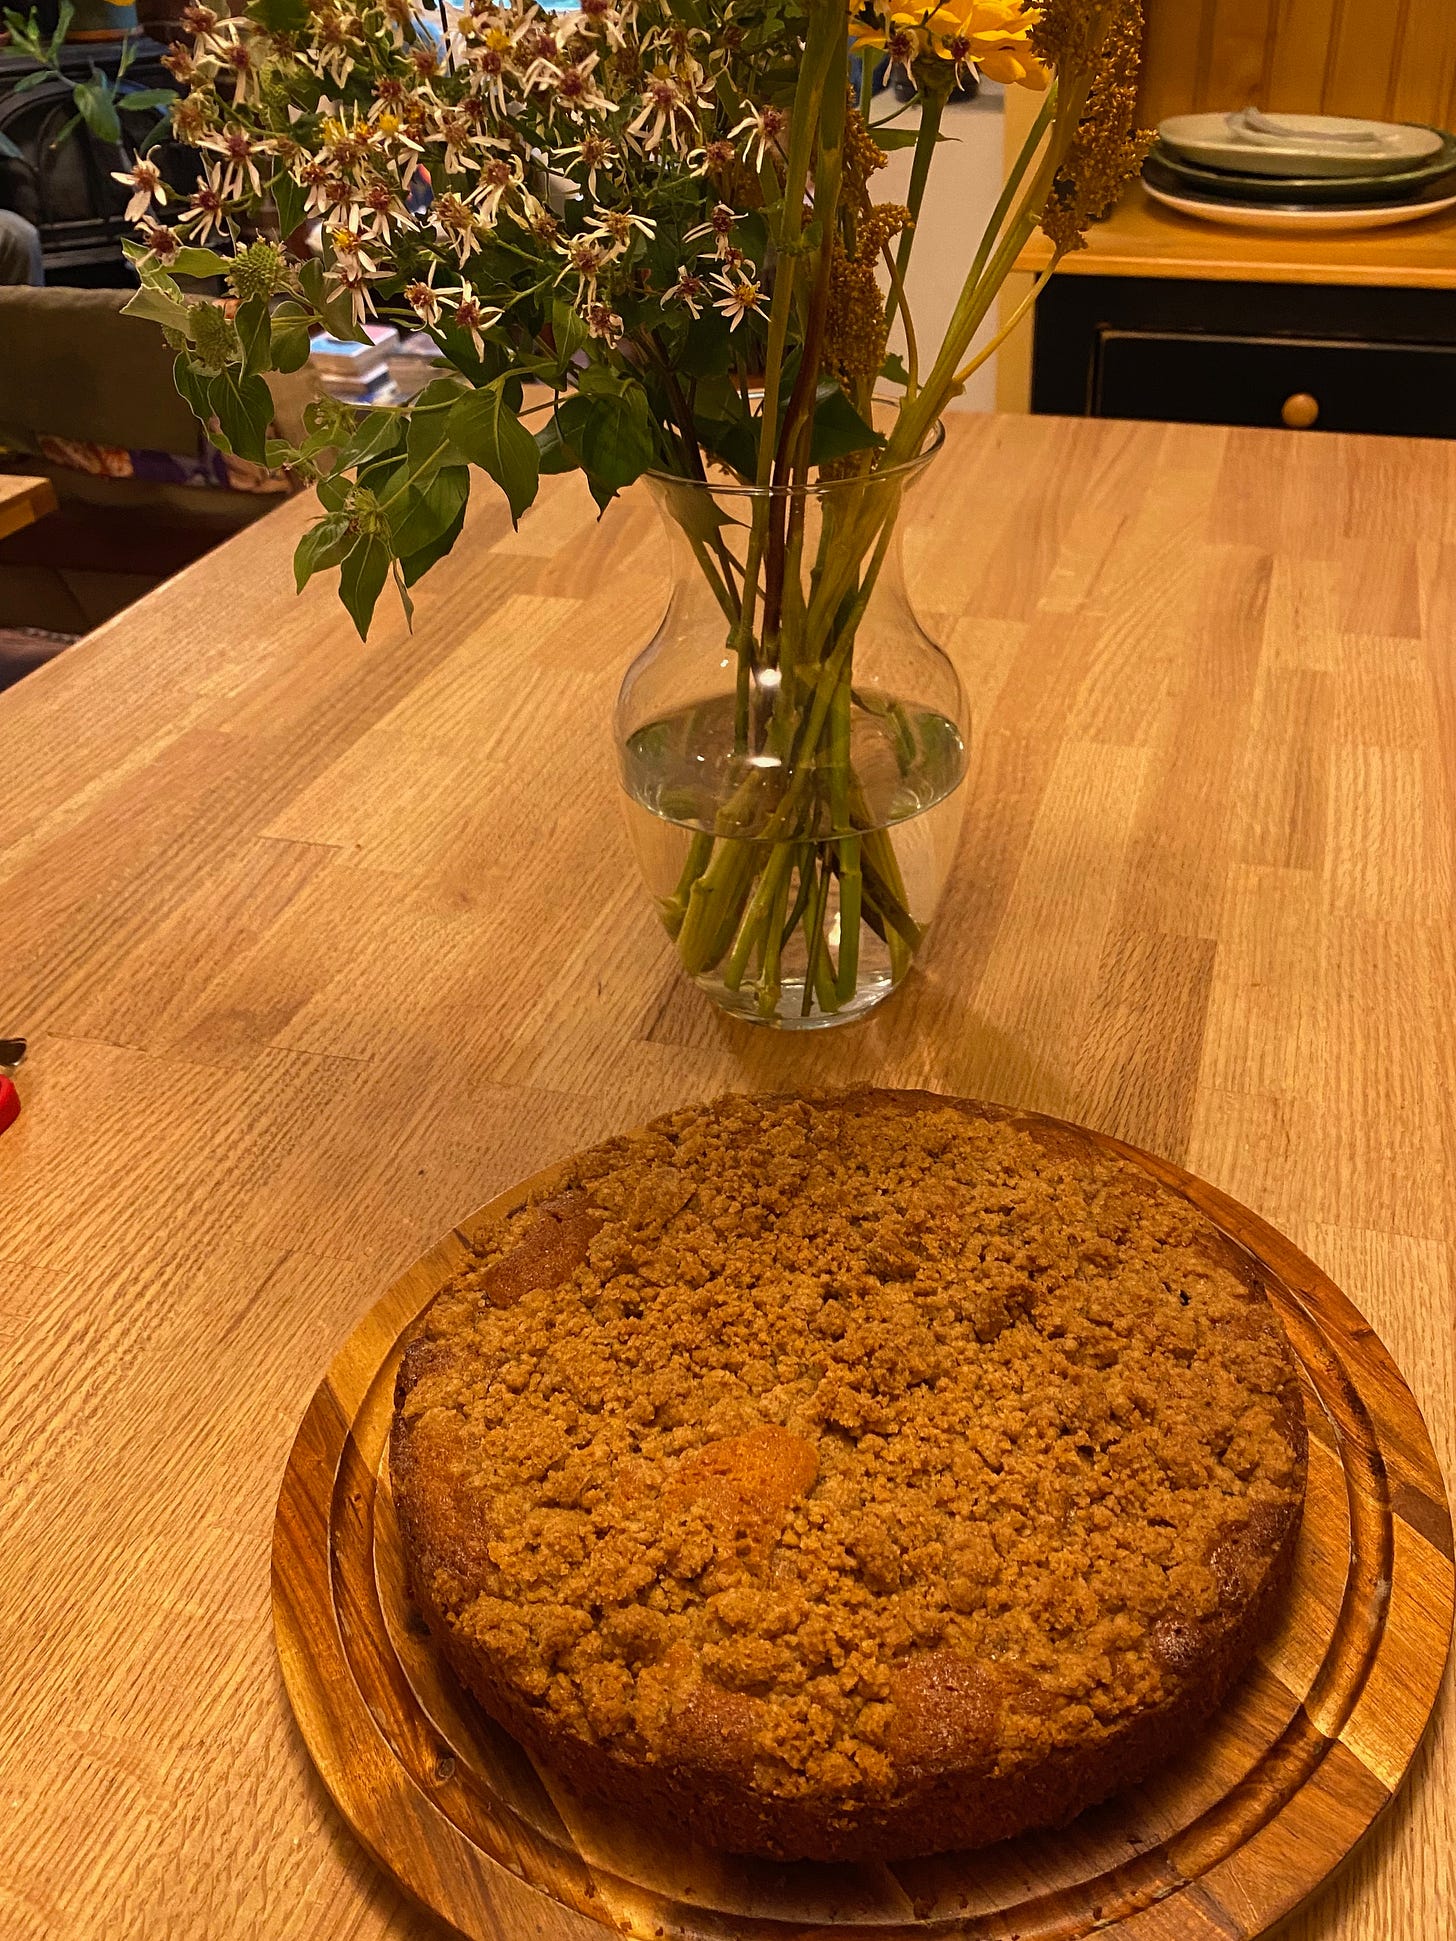 A round cake with a crumb topping sits on a wooden cake board next to a vase of flowers.